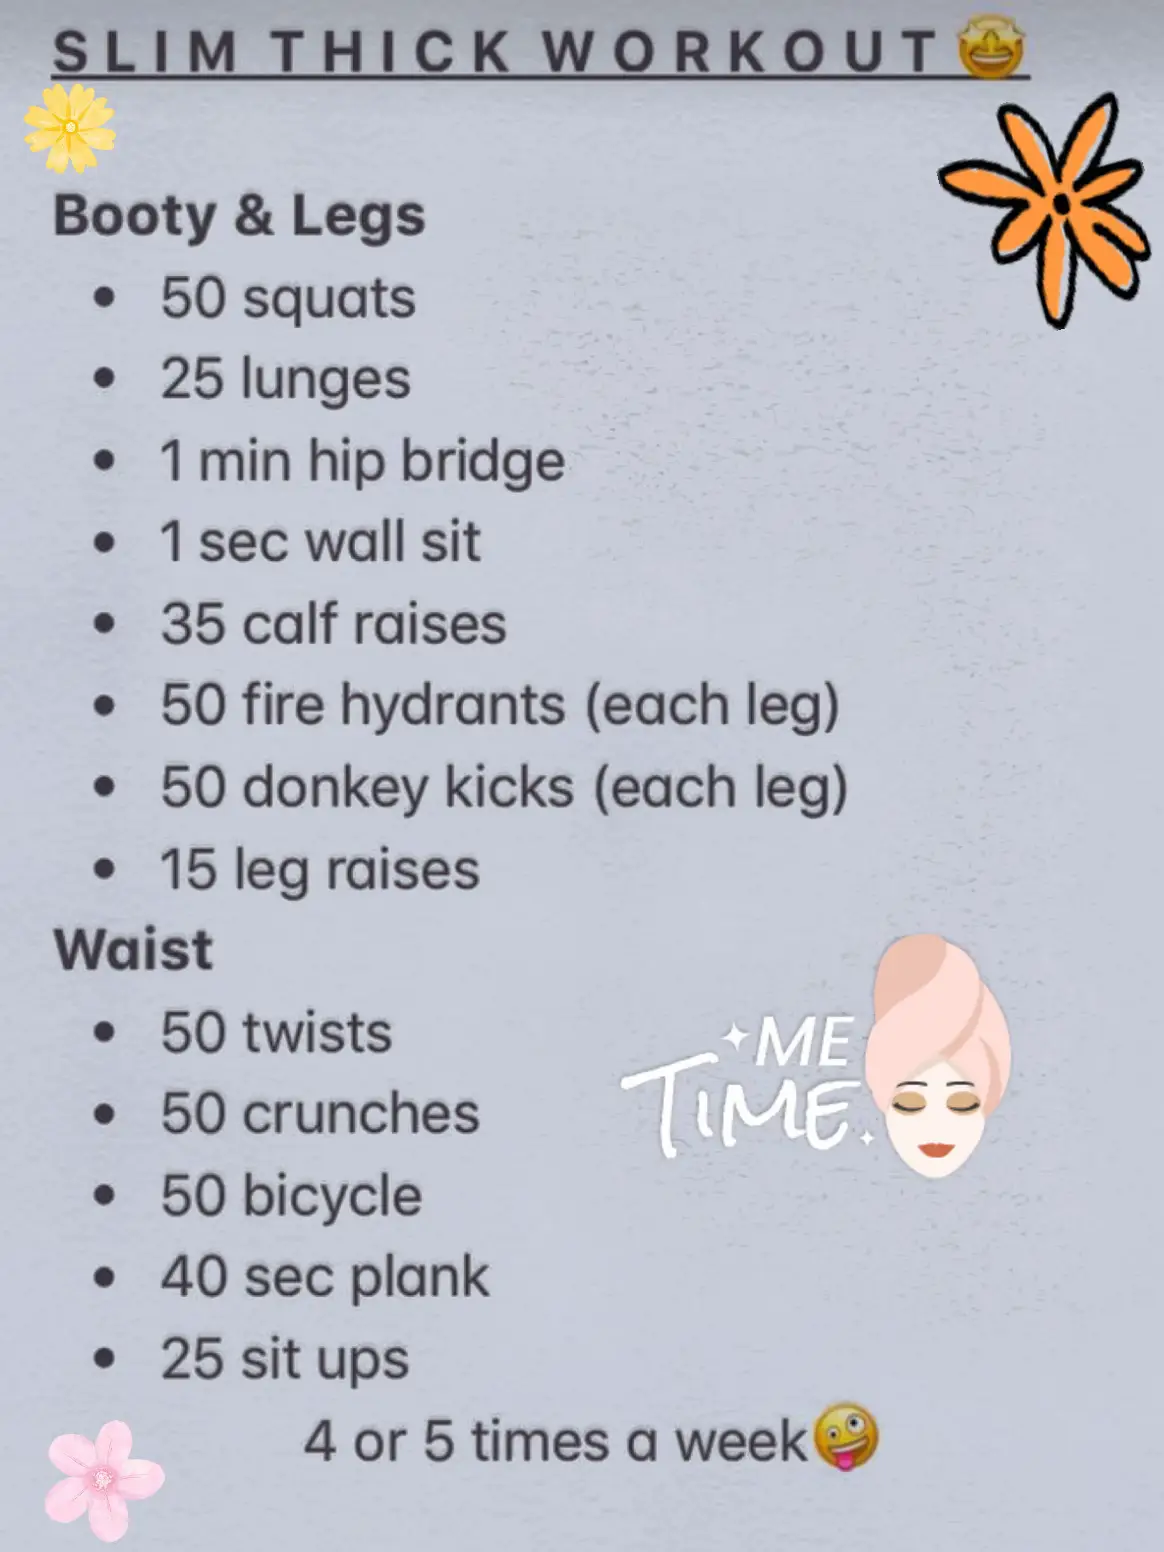 Slim thicc workout🤪  Slim thick workout, Thick body workout, All